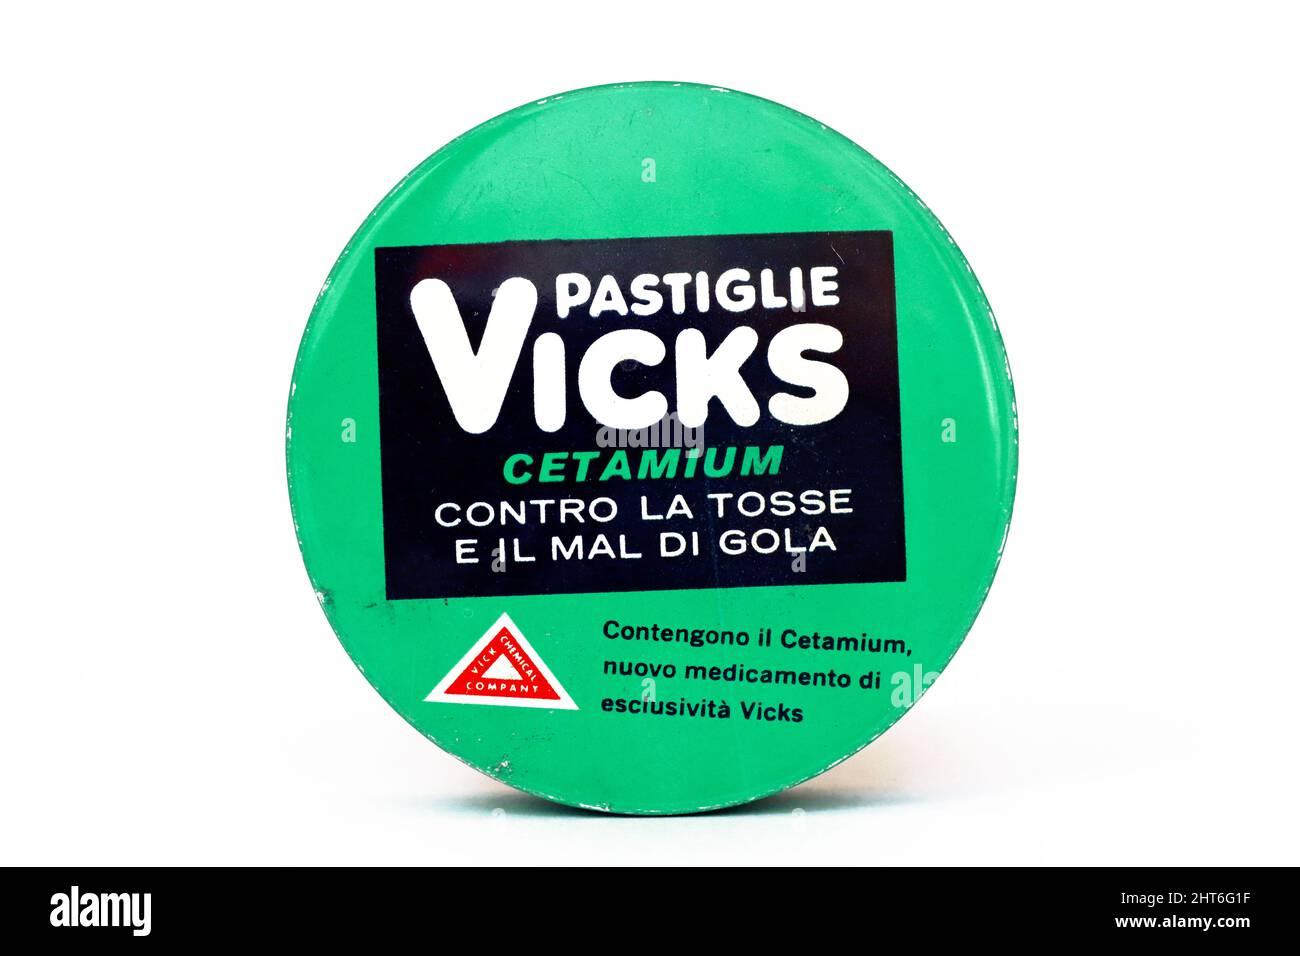 Vintage 1960s VICKS Cetamium Tablets medicine for the treatment of Cough and Sore Throat . VICK CHEMICAL COMPANY – New York, Filadelfia (USA) Stock Photo